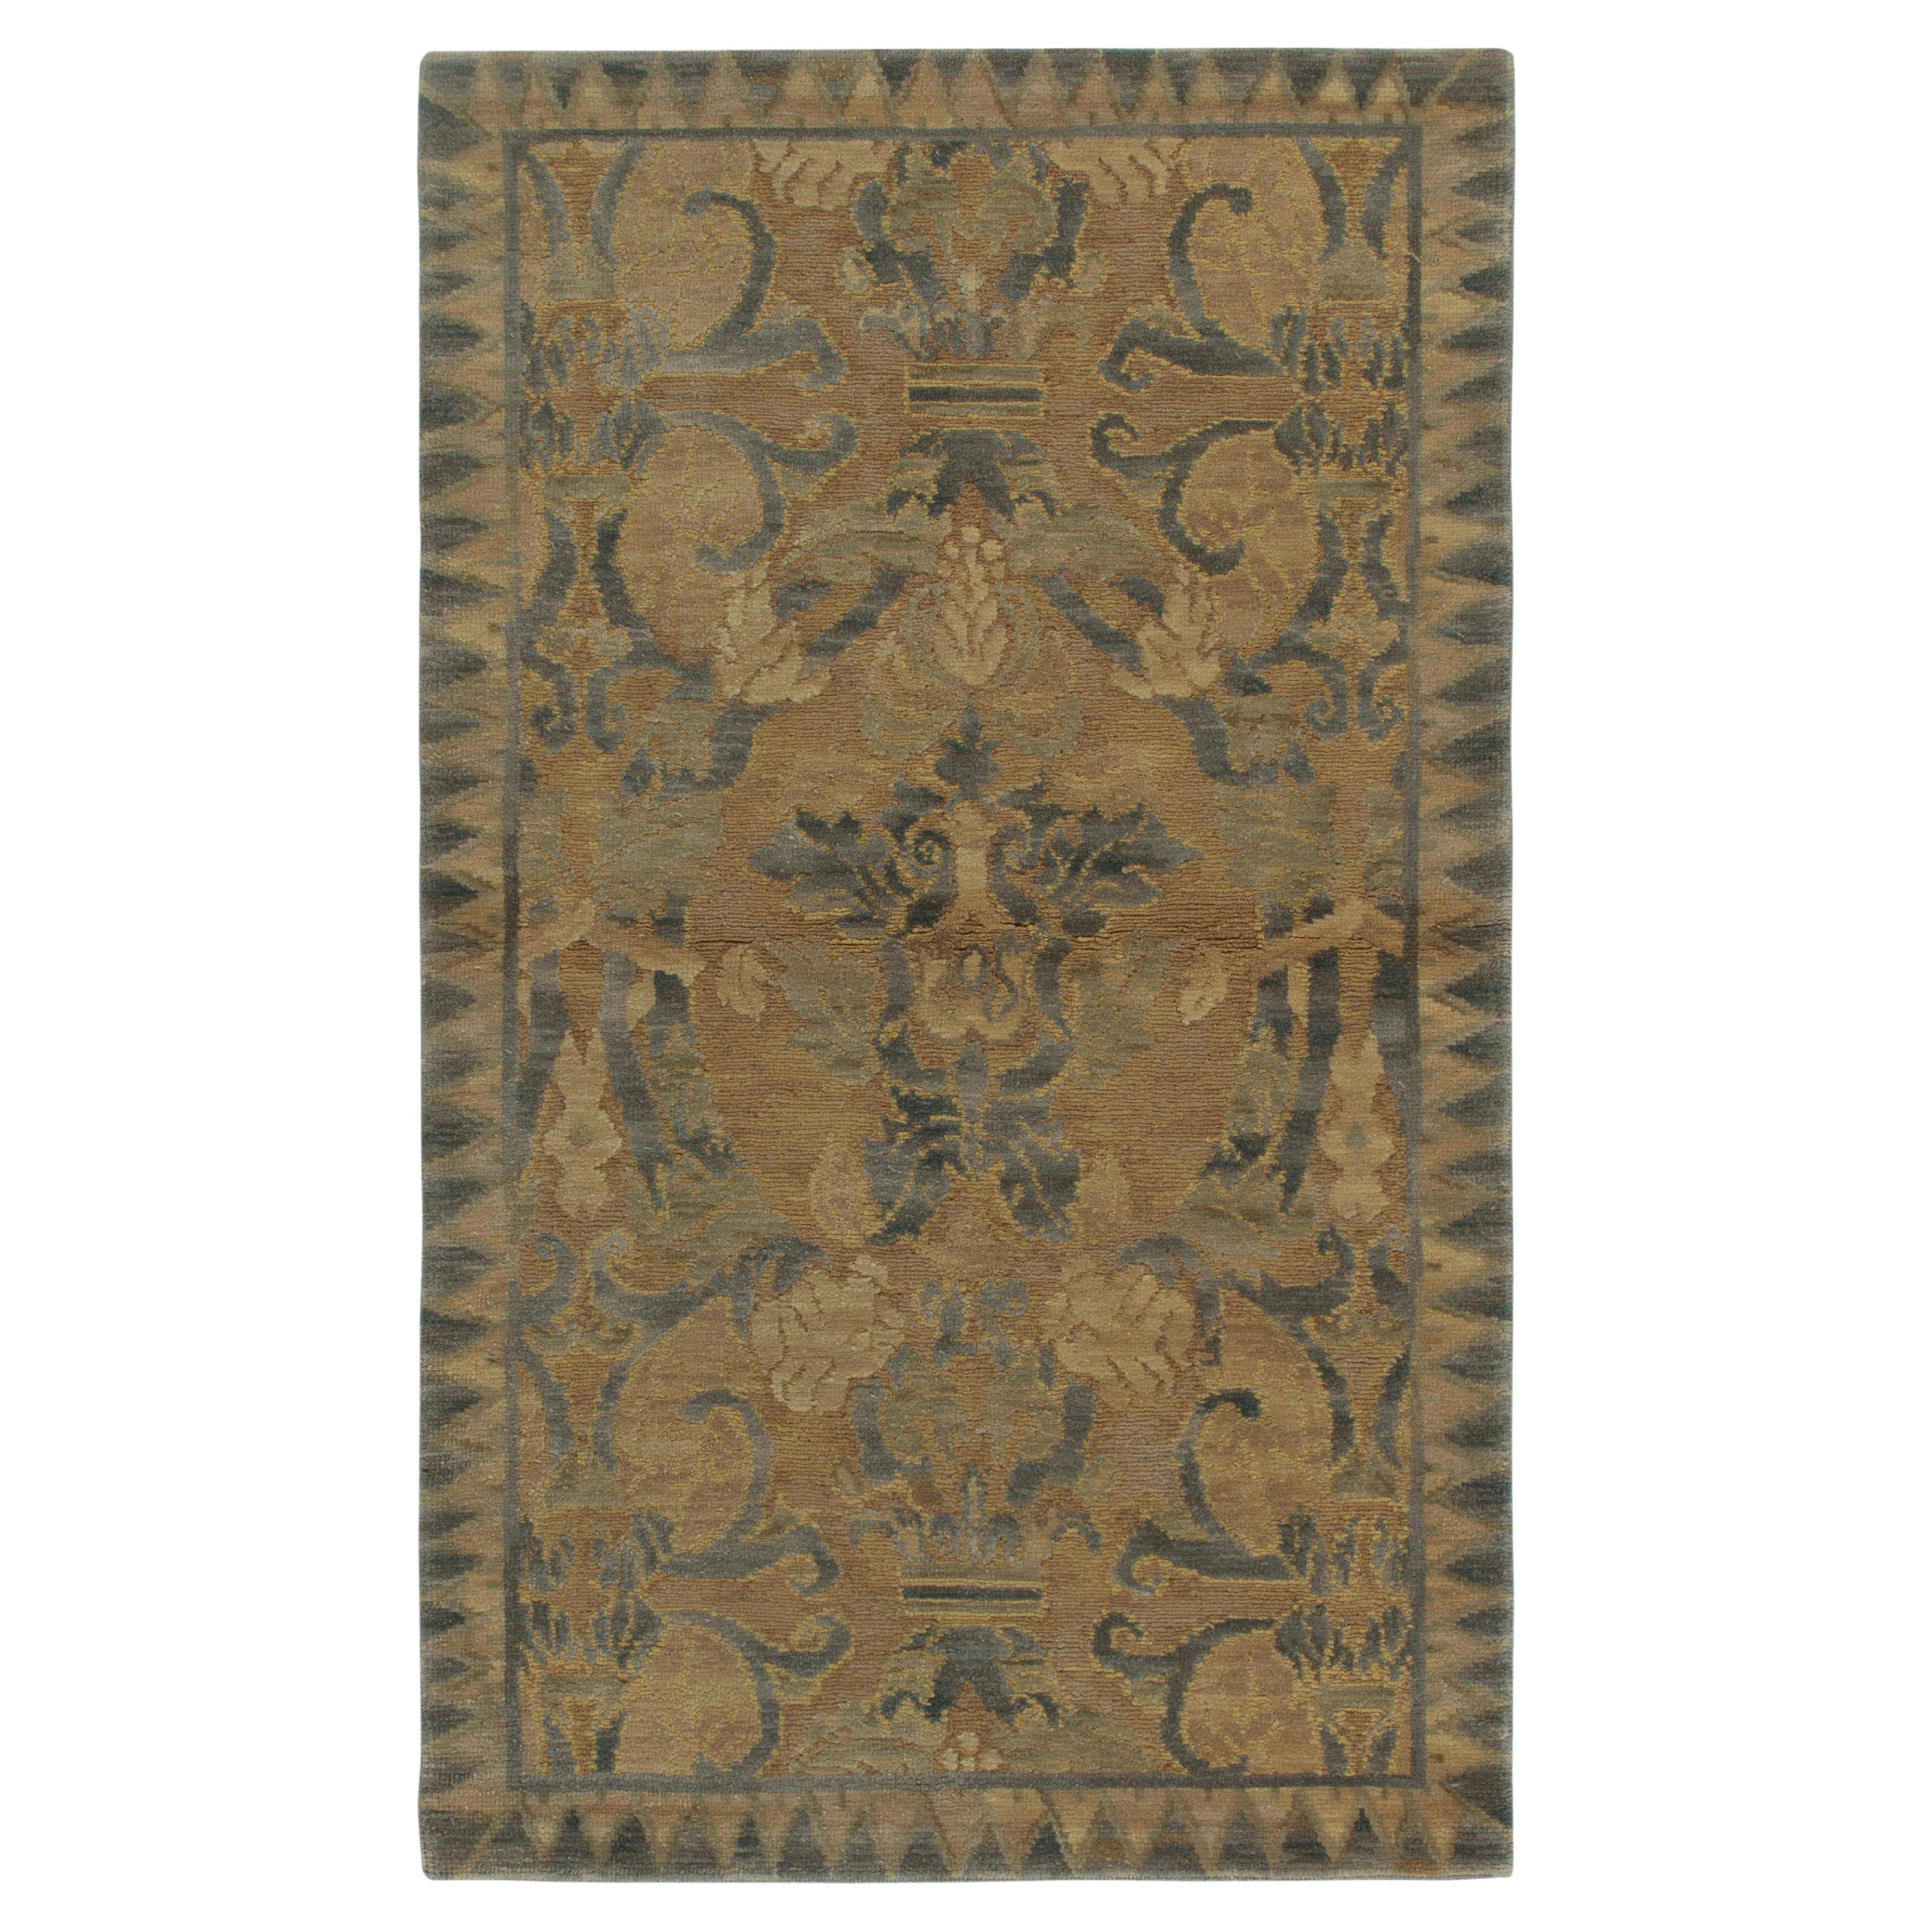 Rug & Kilim’s Arts & Crafts Style Rug in Beige-Brown and Blue Floral Patterns For Sale